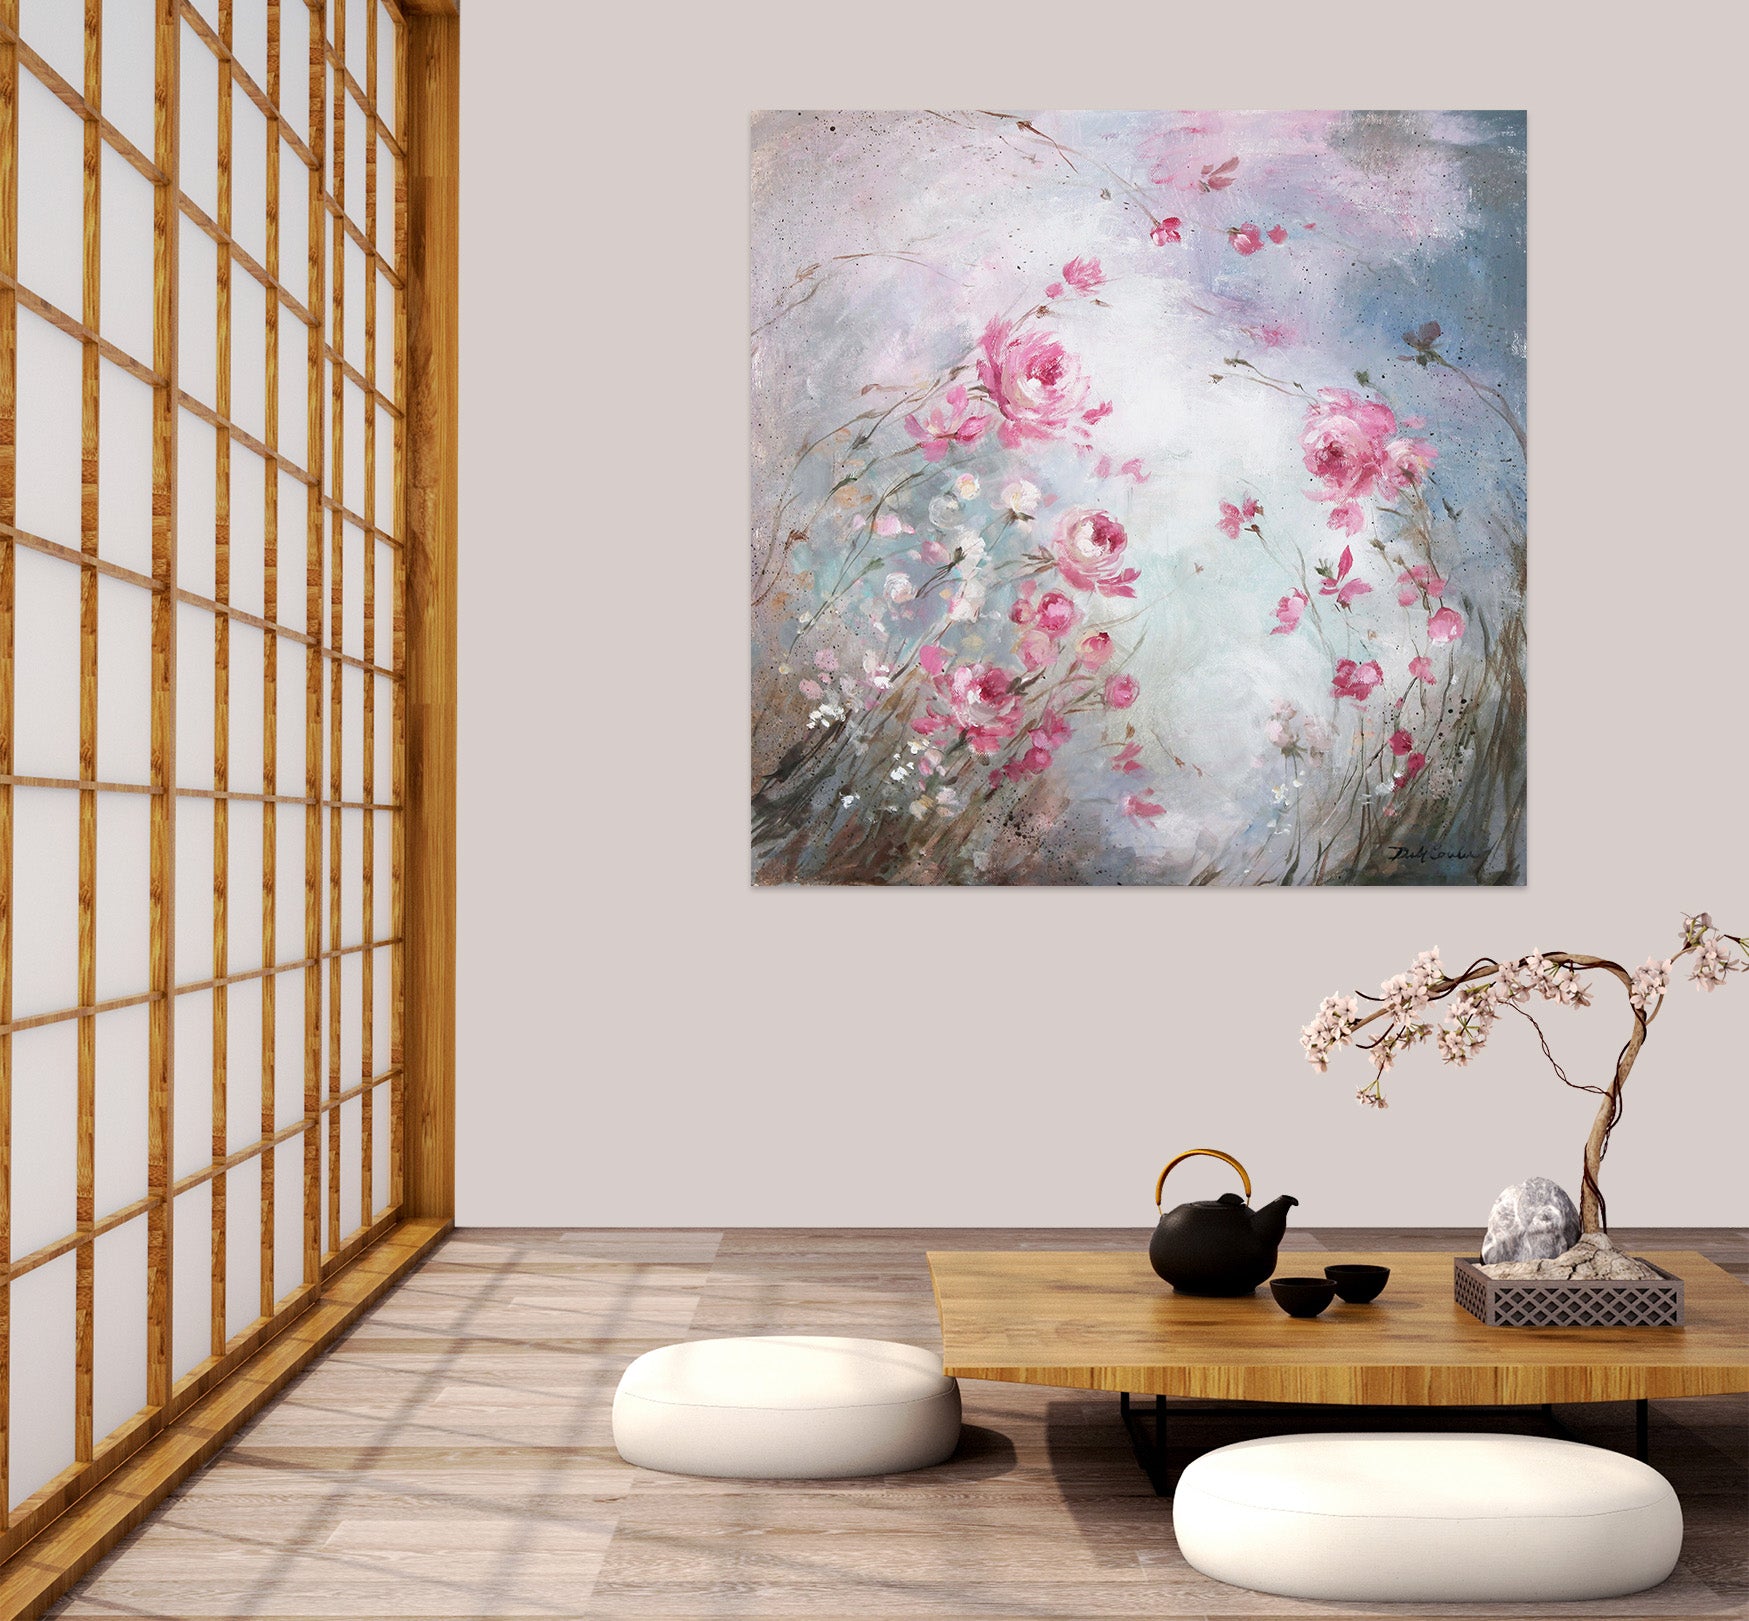 3D Pink Flowers 002 Debi Coules Wall Sticker